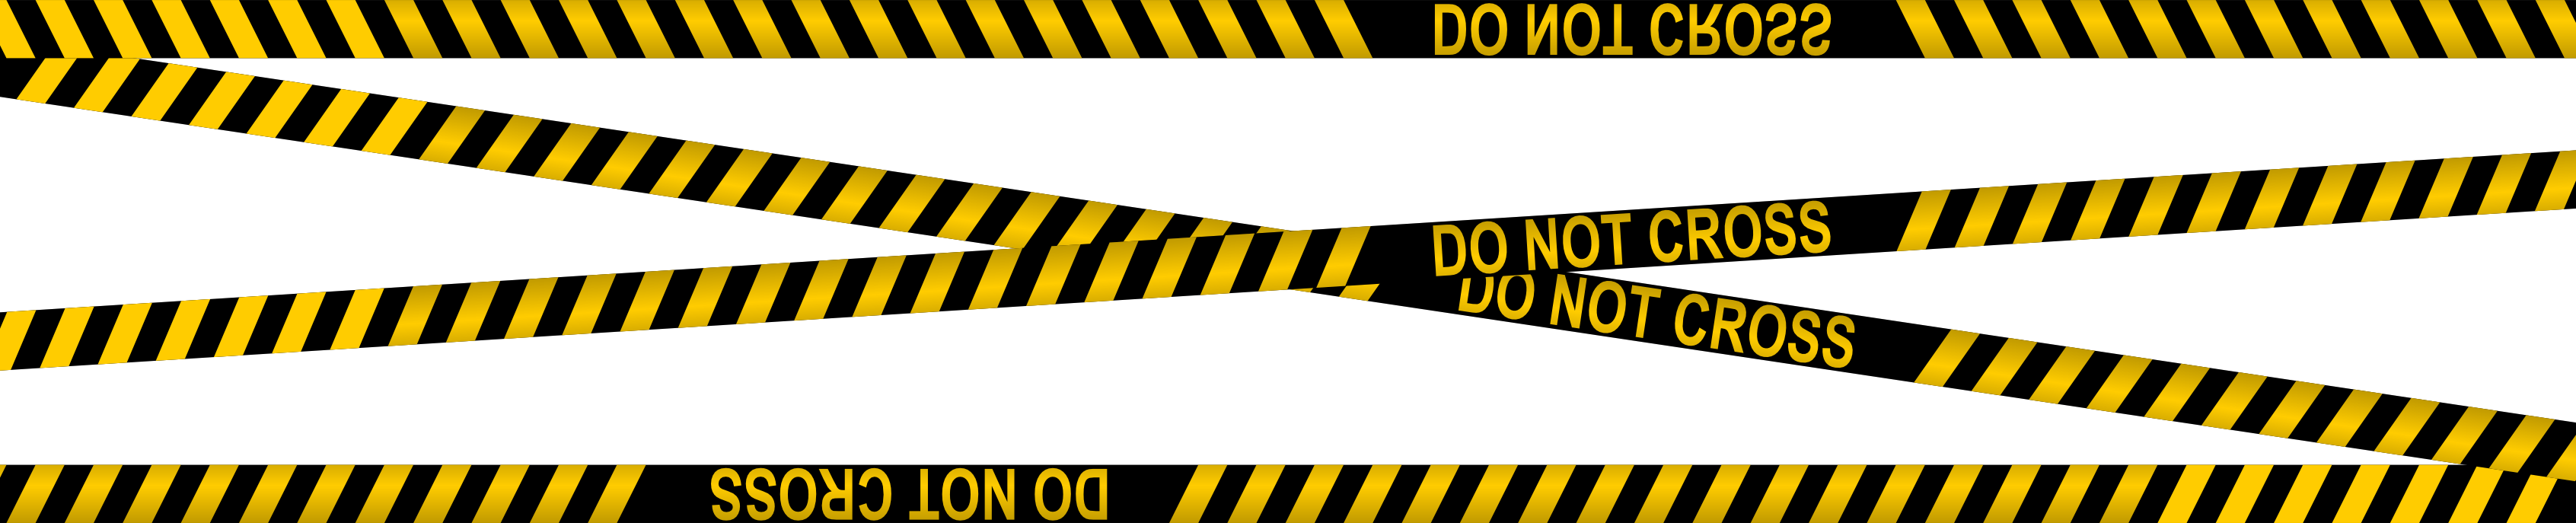 Yellow Caution Tape PNG Clipart Background